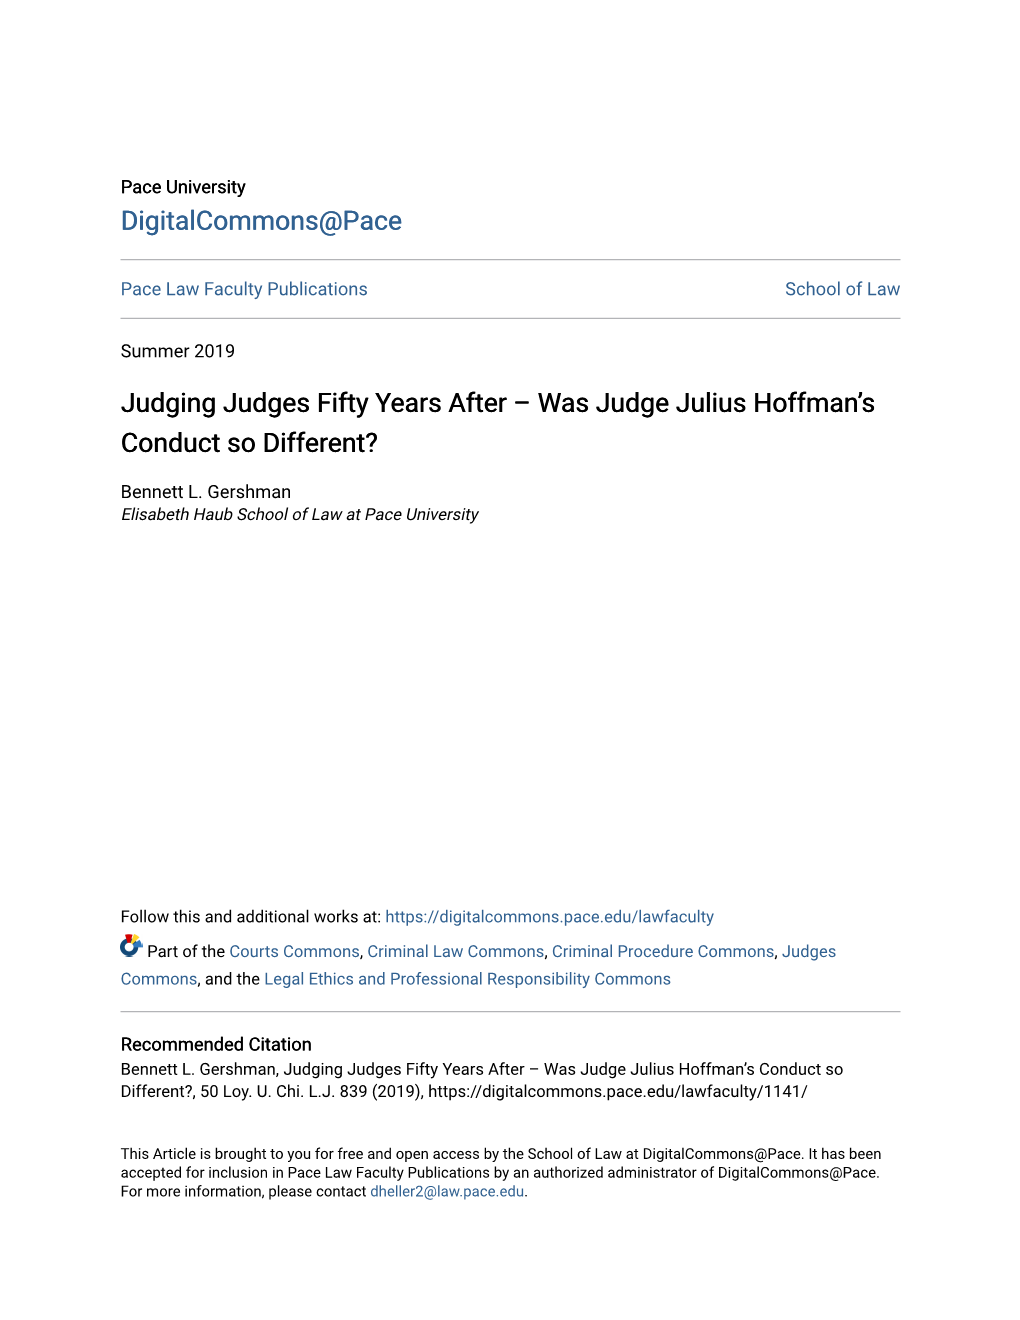 Was Judge Julius Hoffman's Conduct So Different?